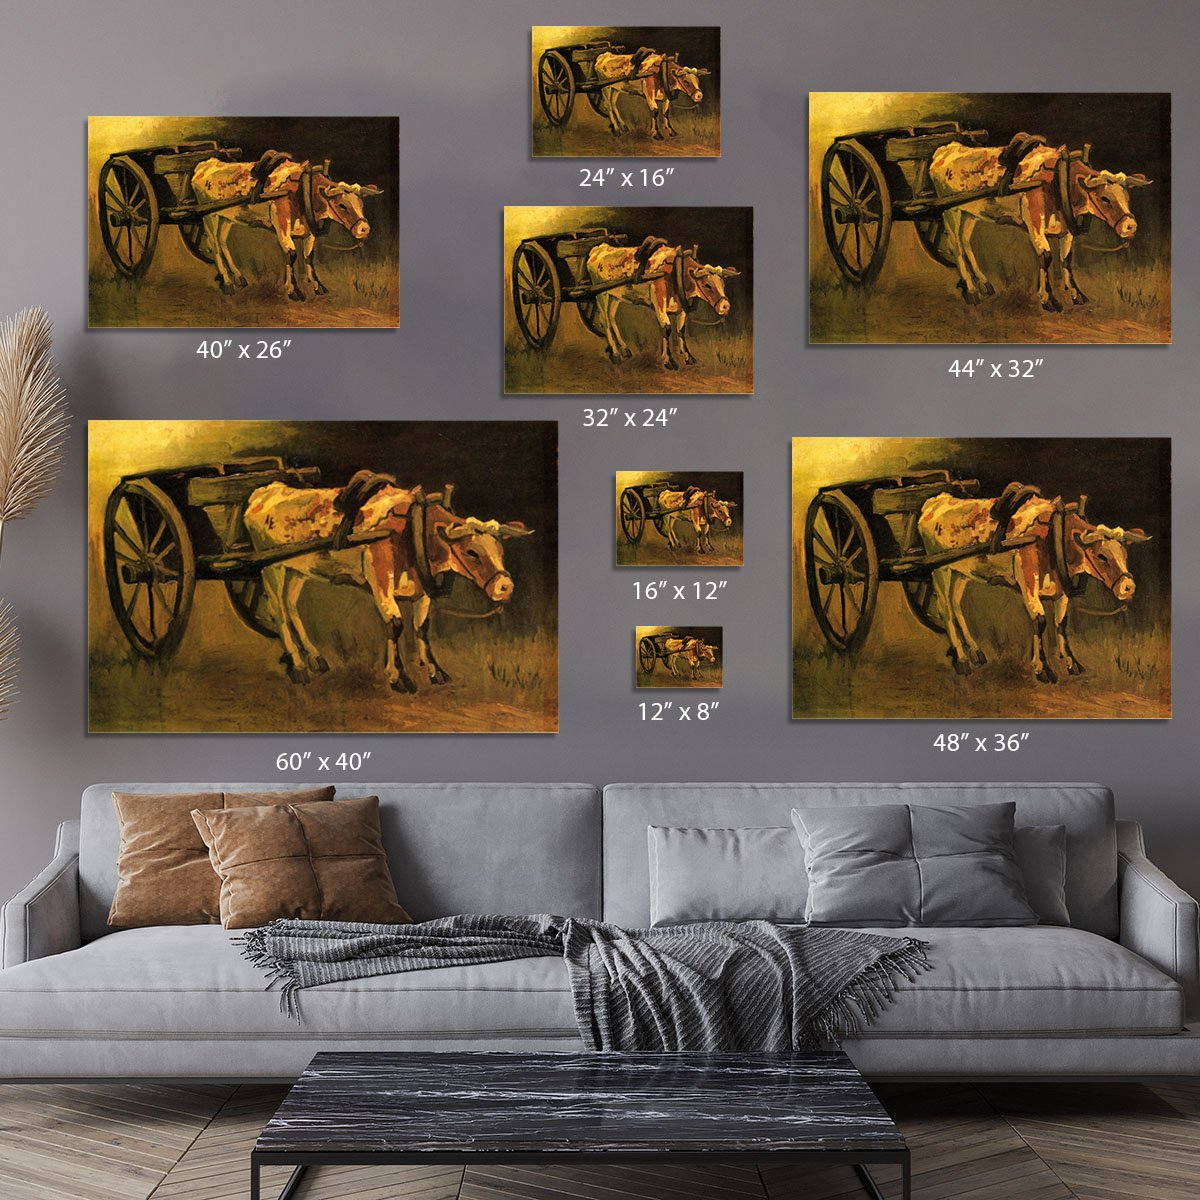 Cart with Red and White Ox by Van Gogh Canvas Print or Poster